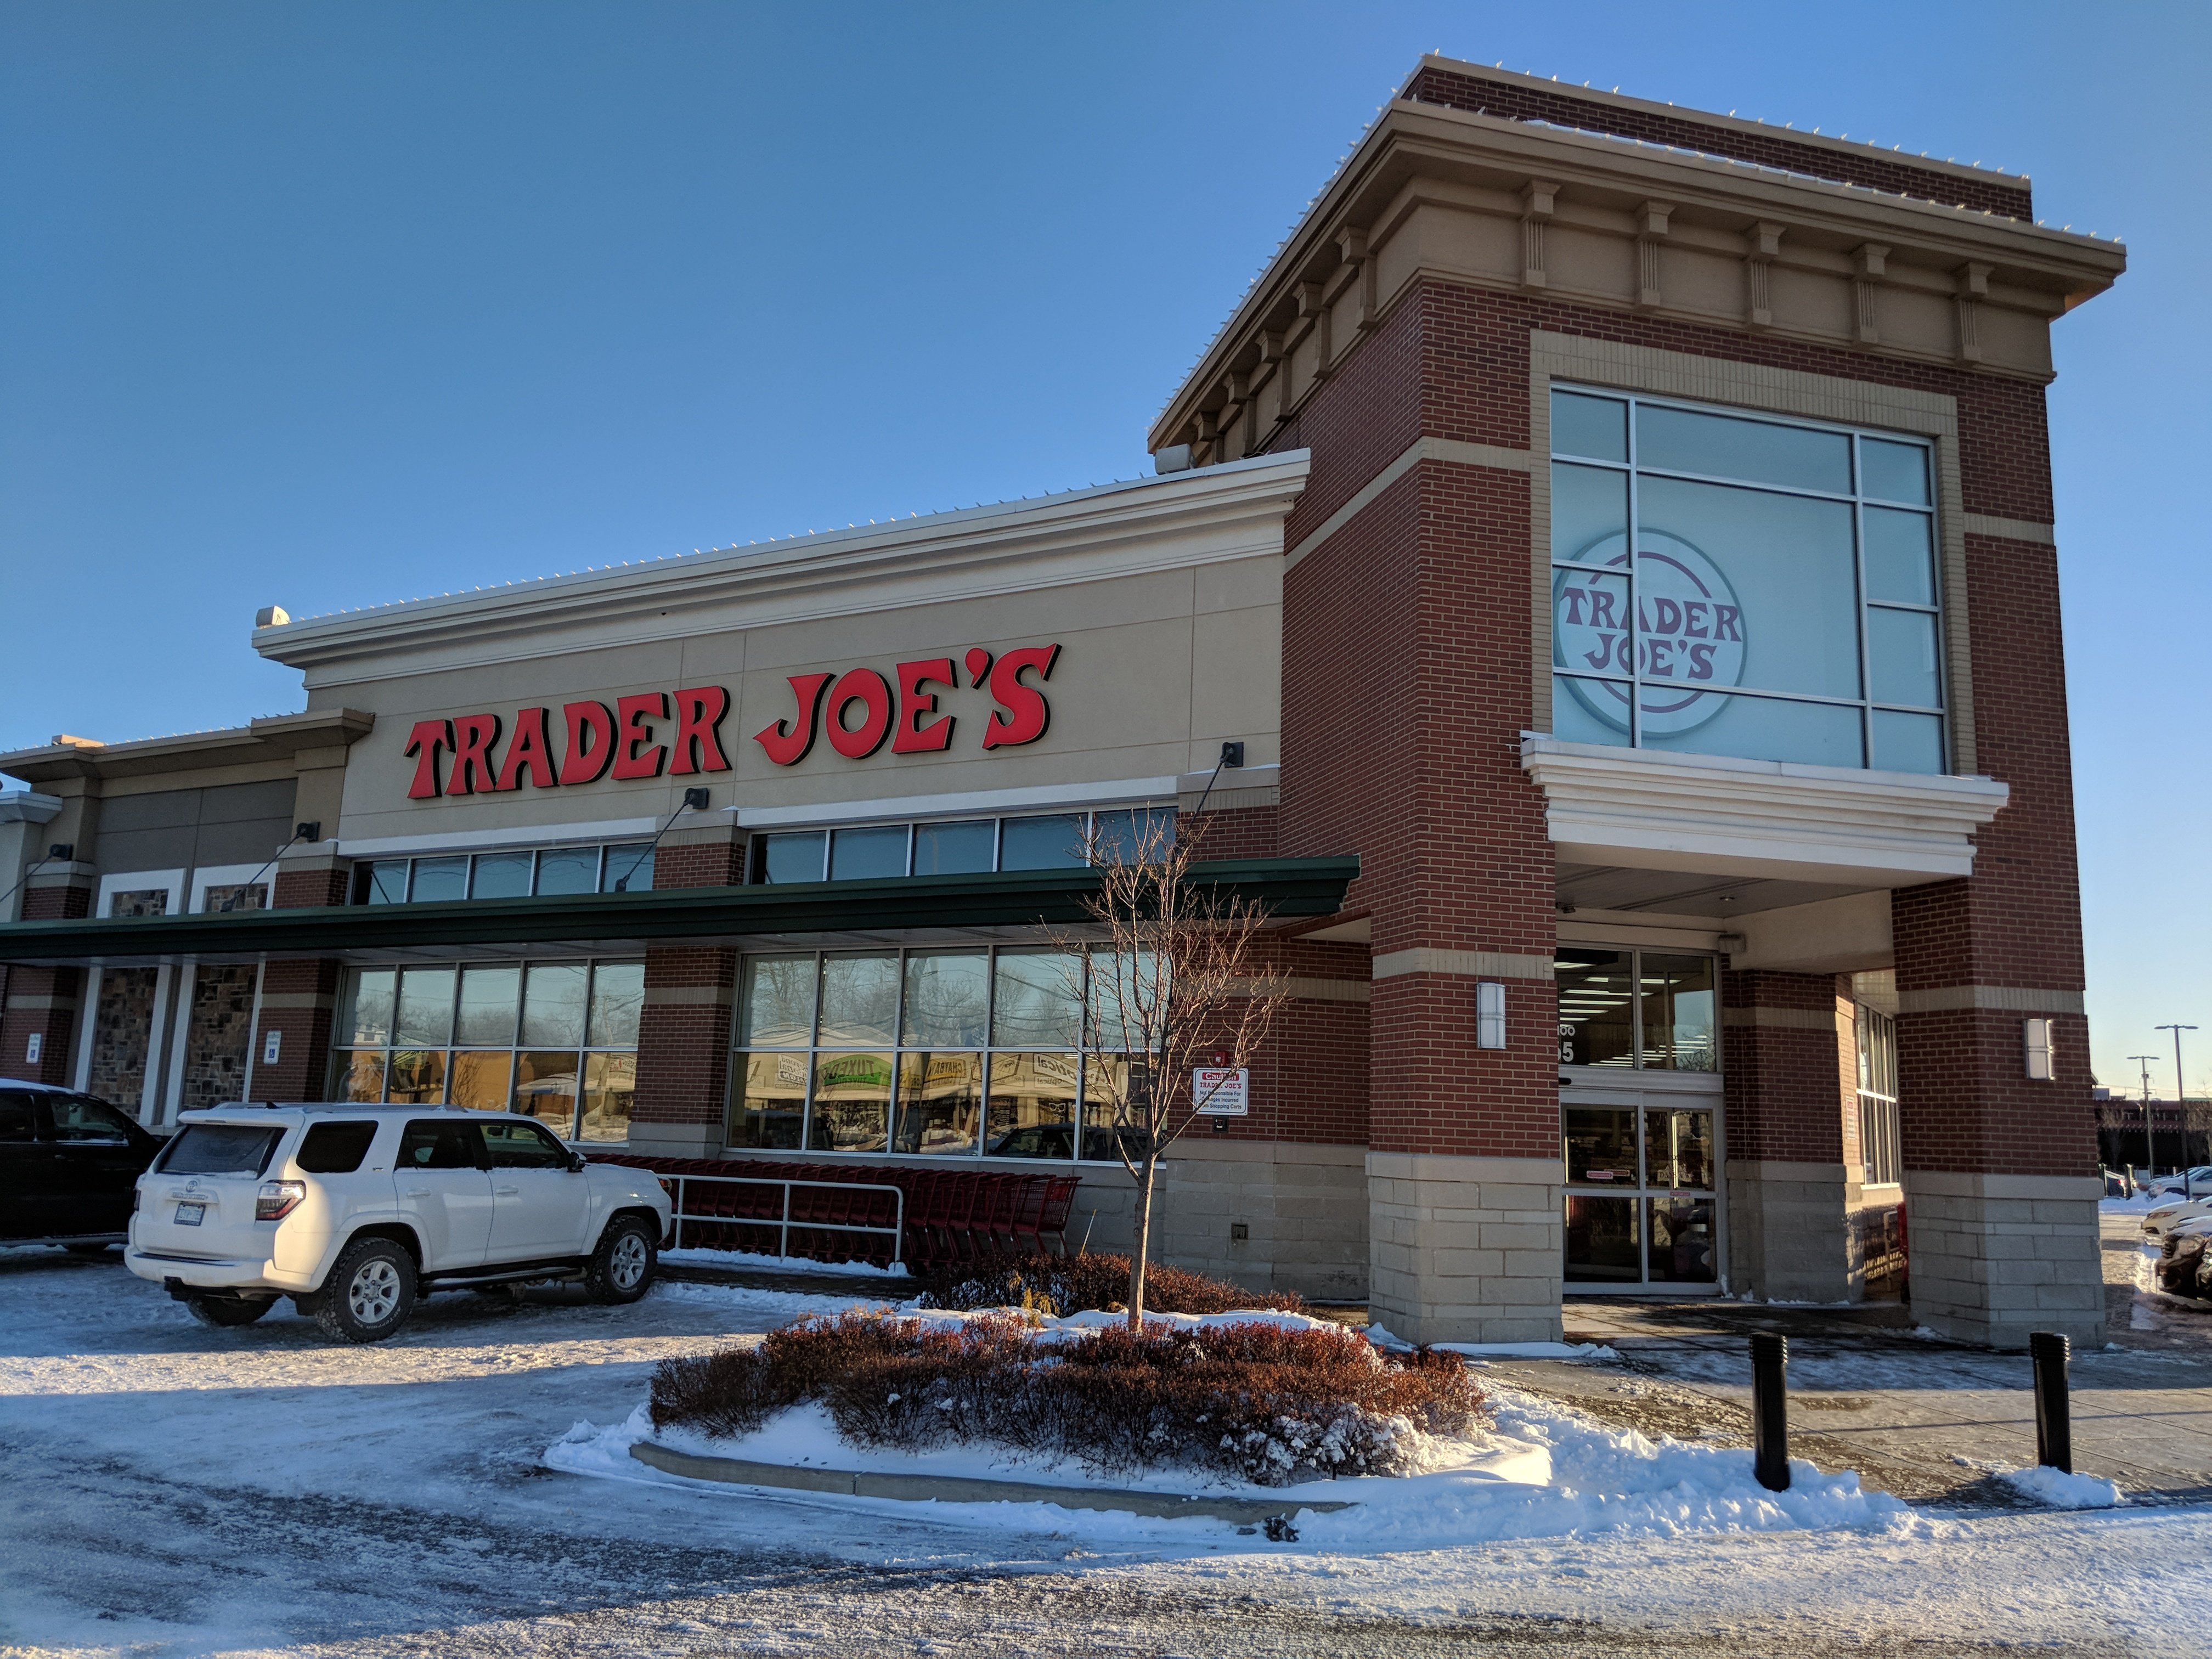 Trader Joe's store in Amherst, New York. The image was taken on January 14, 2018 | Photo: Wikimedia/Sikander Iqbal